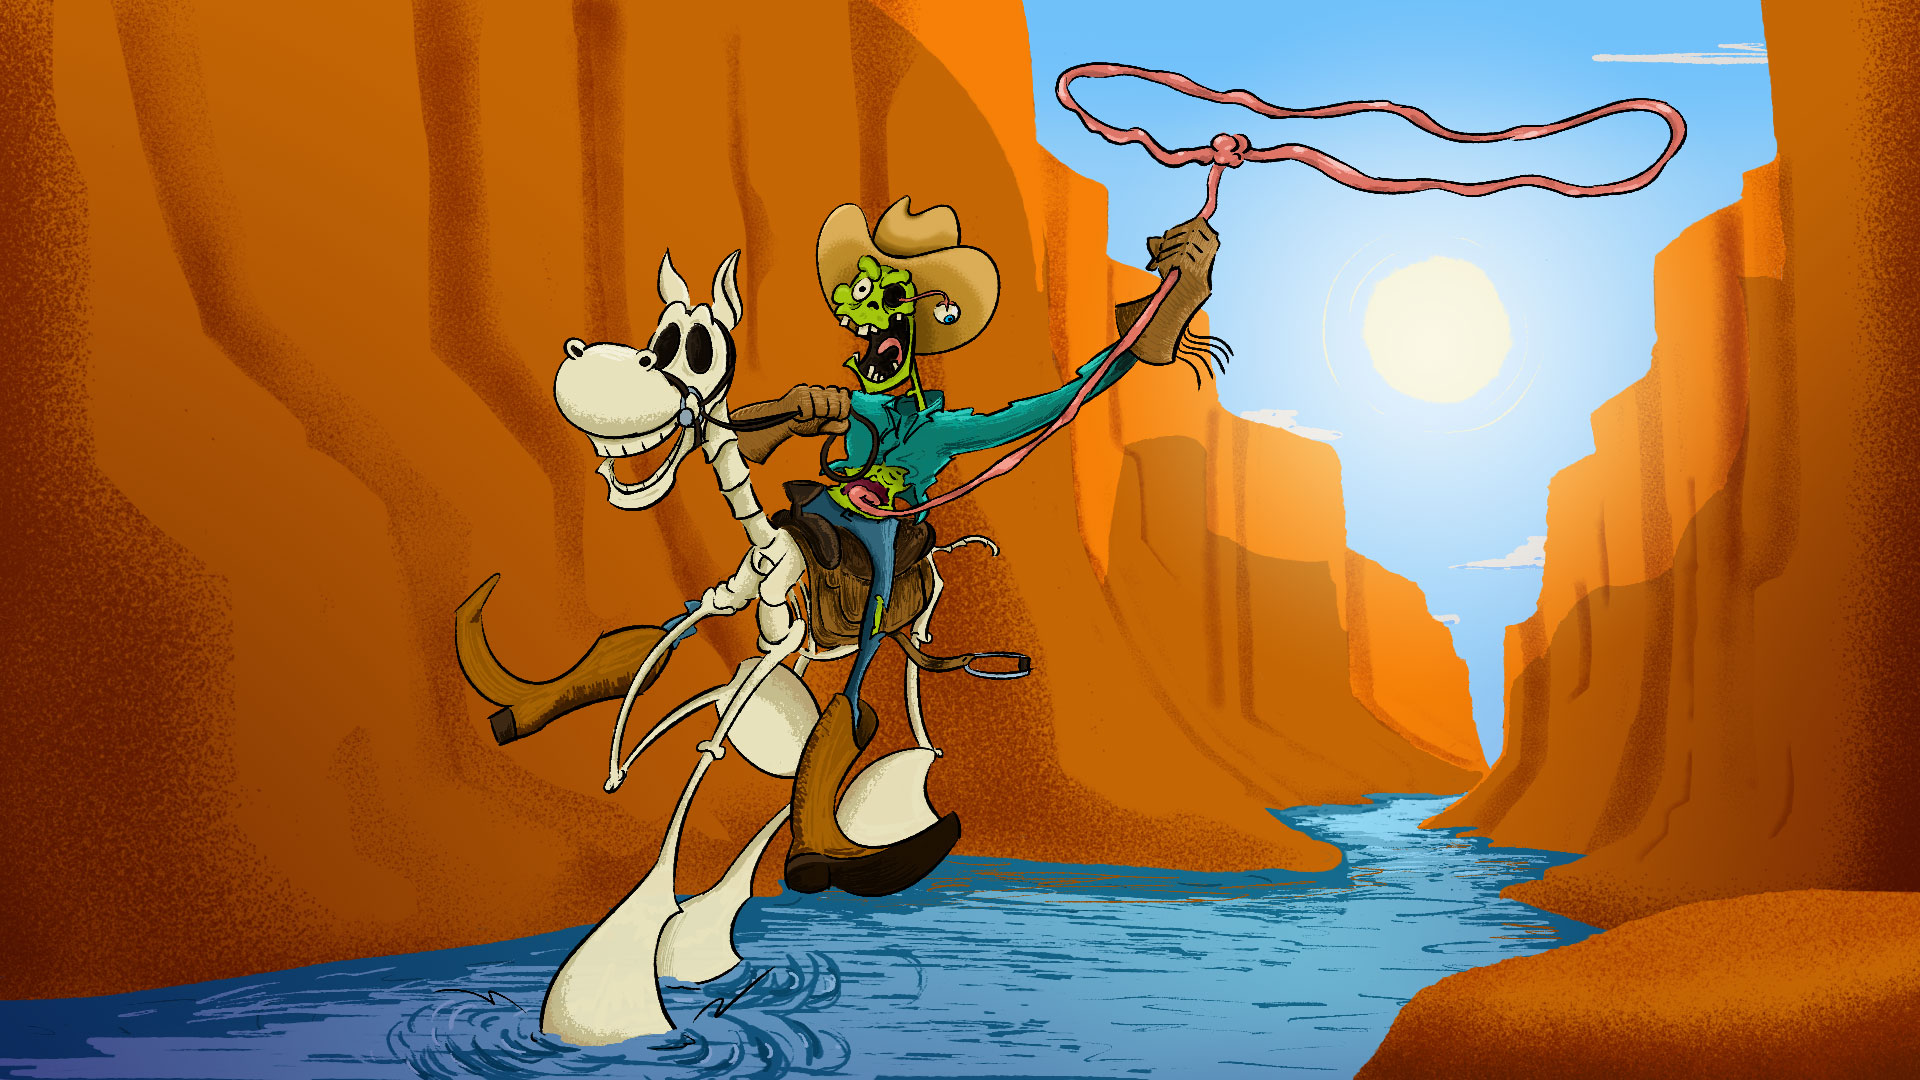 An illustration of a zombie cowboy riding a skeleton horse in a gorge. The zombie’s small intestine—pulled out from his abdomen—is being used as a lasso.